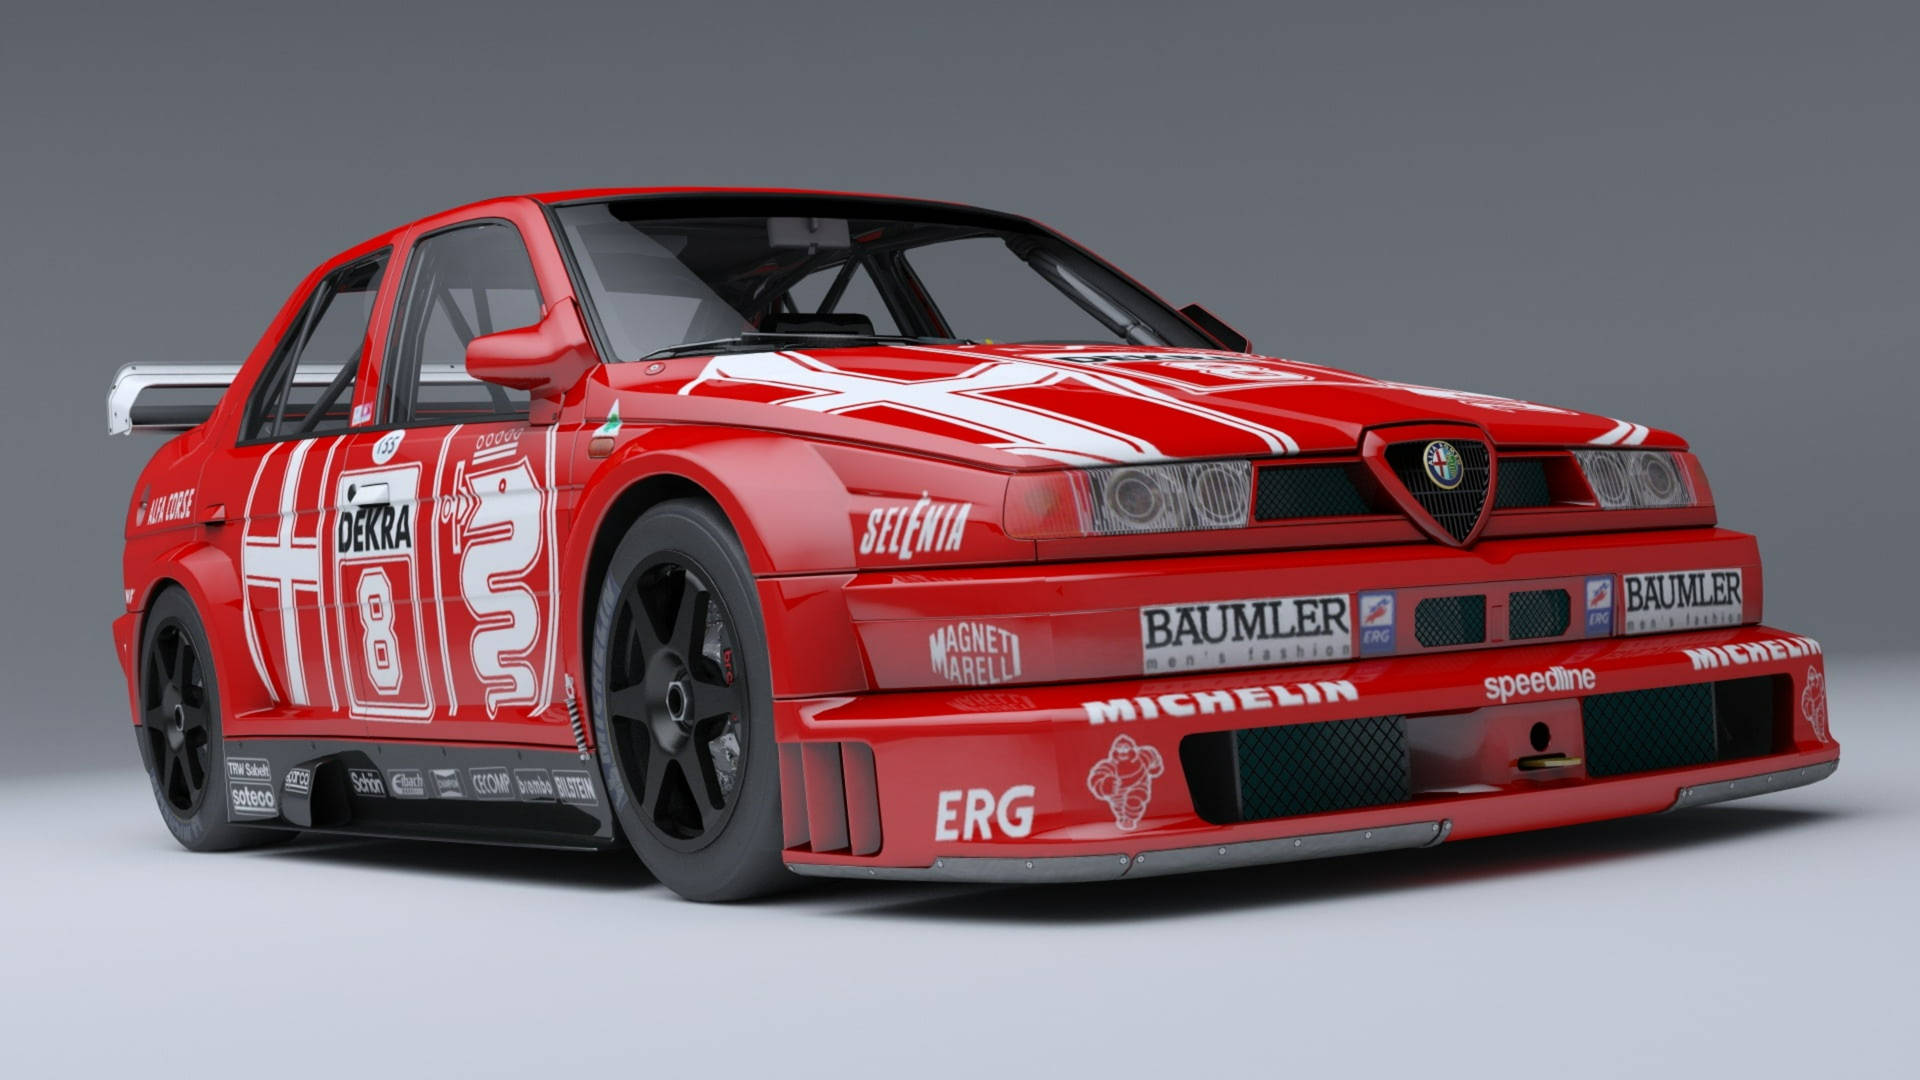 Rev up your engines with an Alfa Romeo 155 V6 Ti Wallpaper